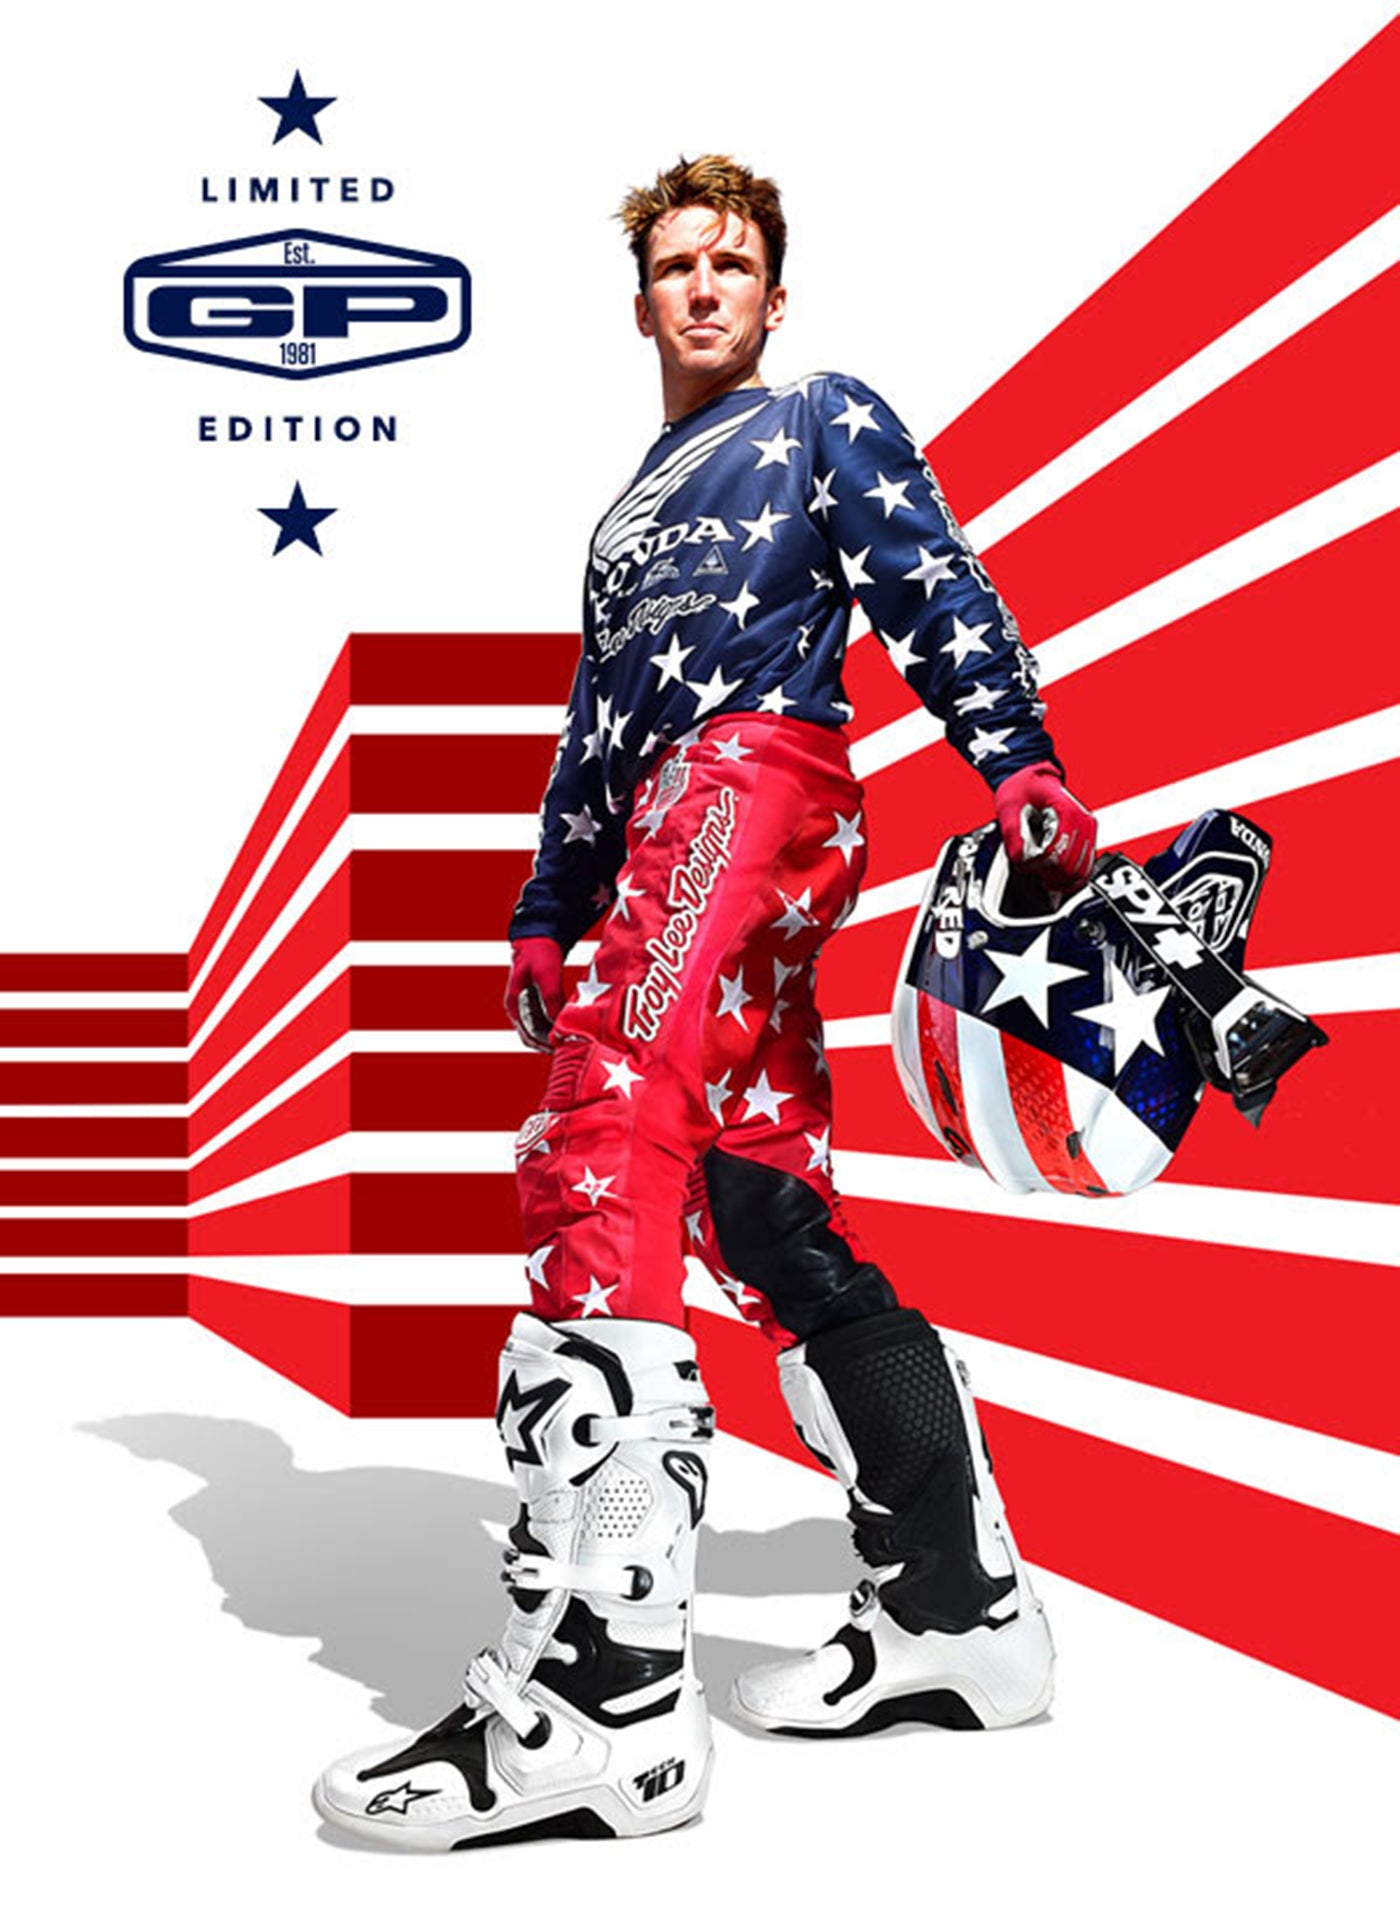 Troy Lee Designs 2017 TLD Riding Gear GP Liberty Limited Edition